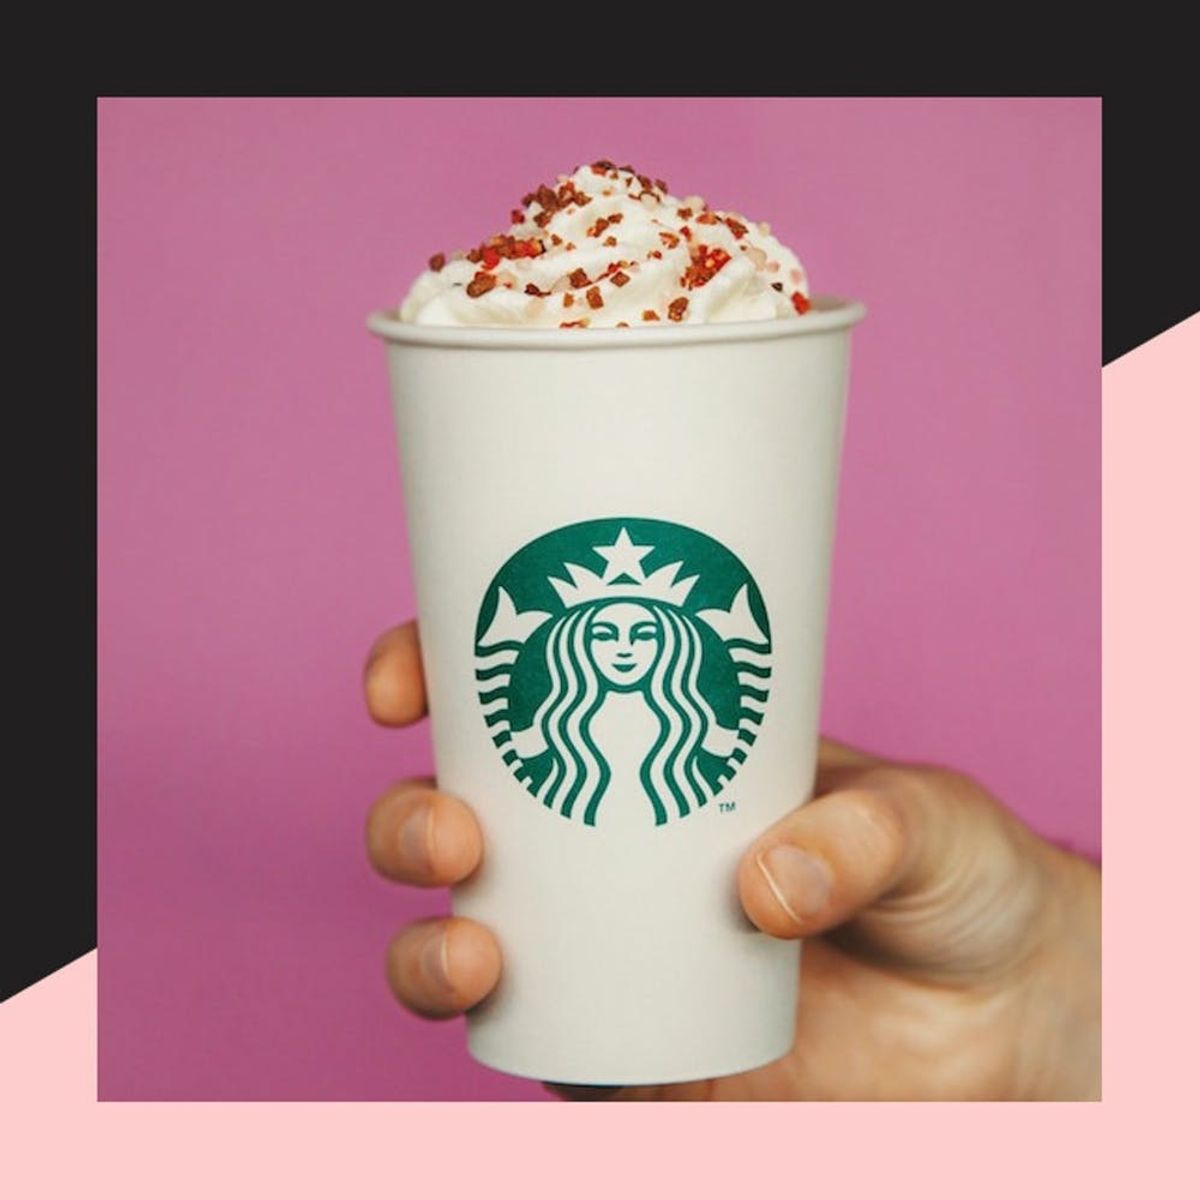 We Tried Starbucks’ New Valentine’s Day Drink and Have Some *Thoughts*